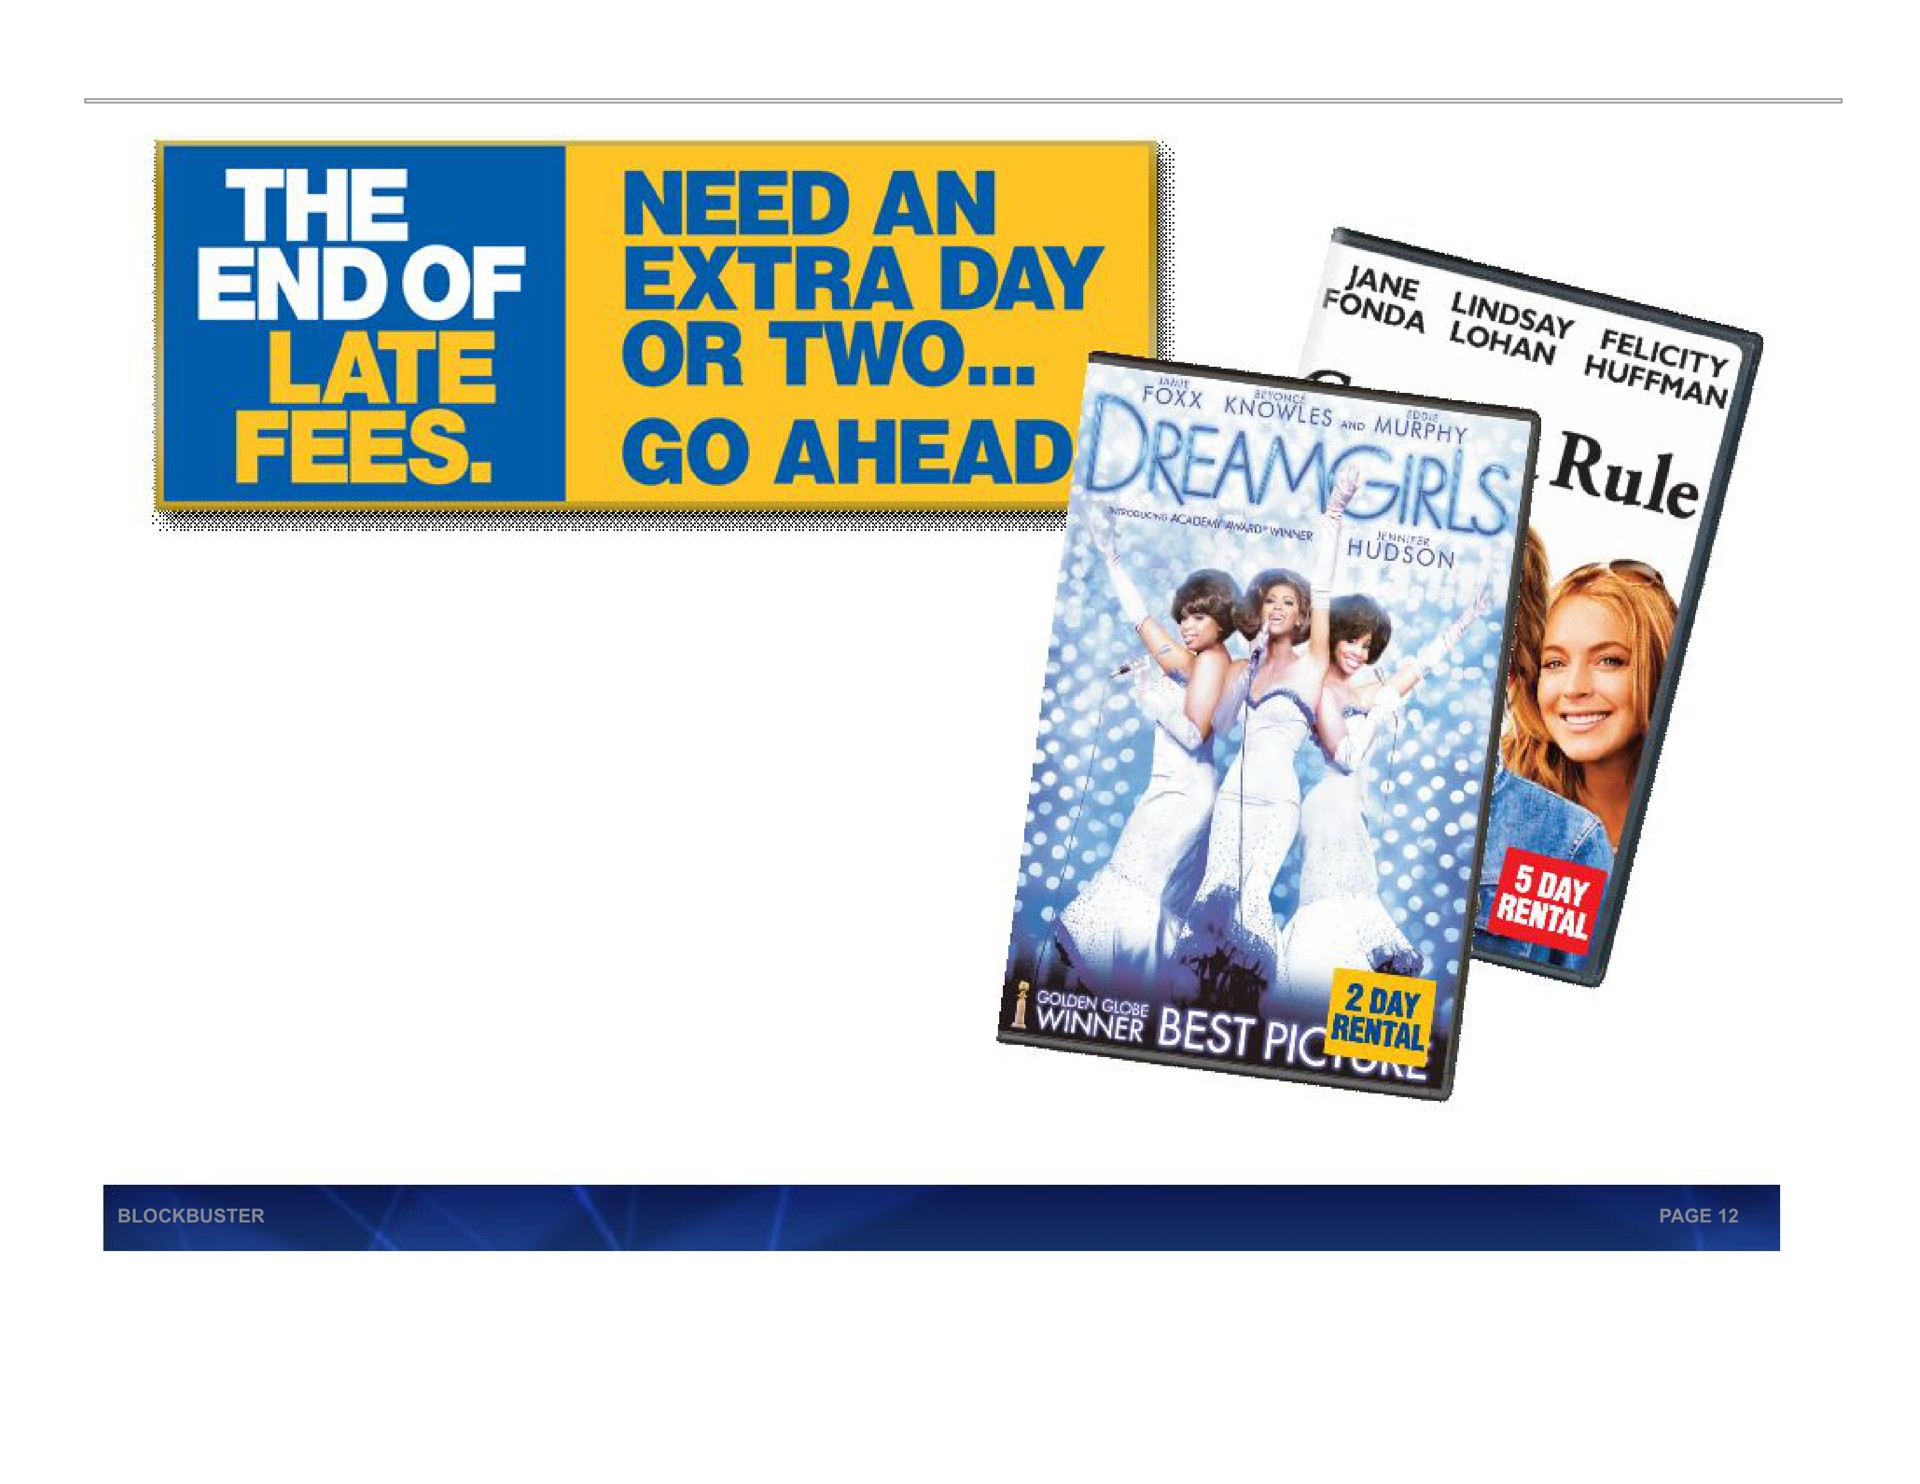 an extra day or two go ahead fame ars rule | Blockbuster Video